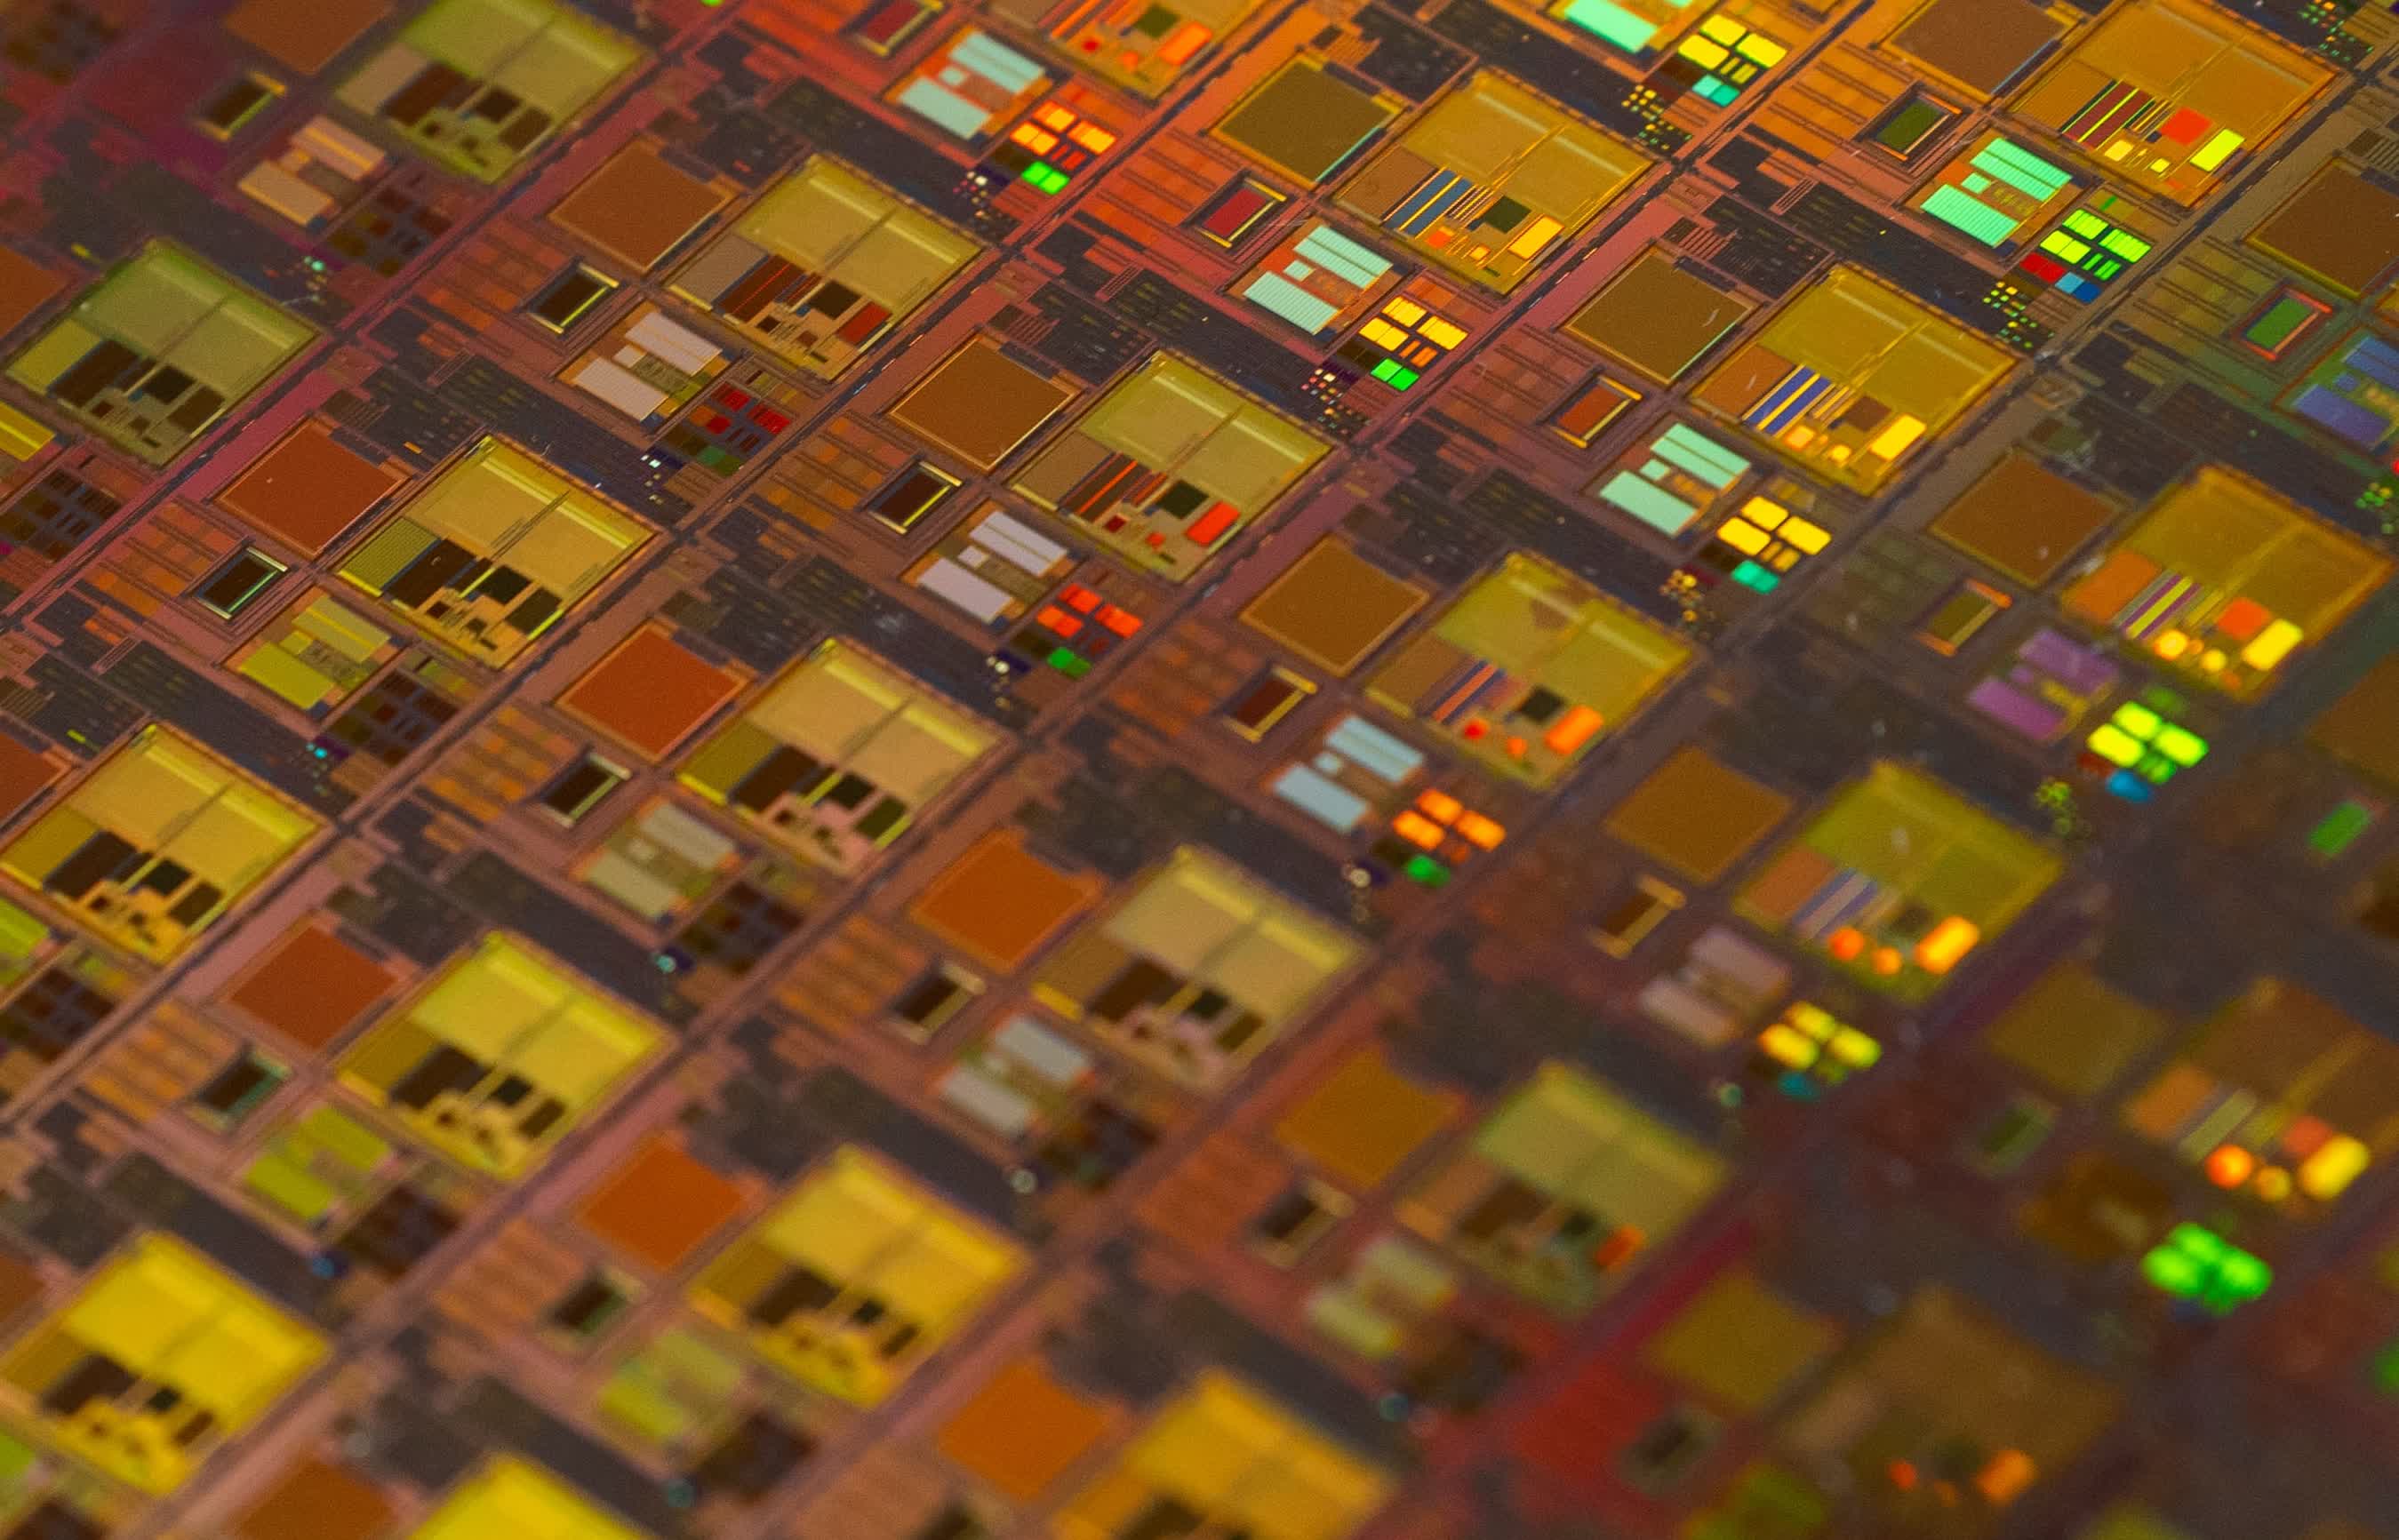 Google IT hardware manager says Moore's Law has been dead for 10 years